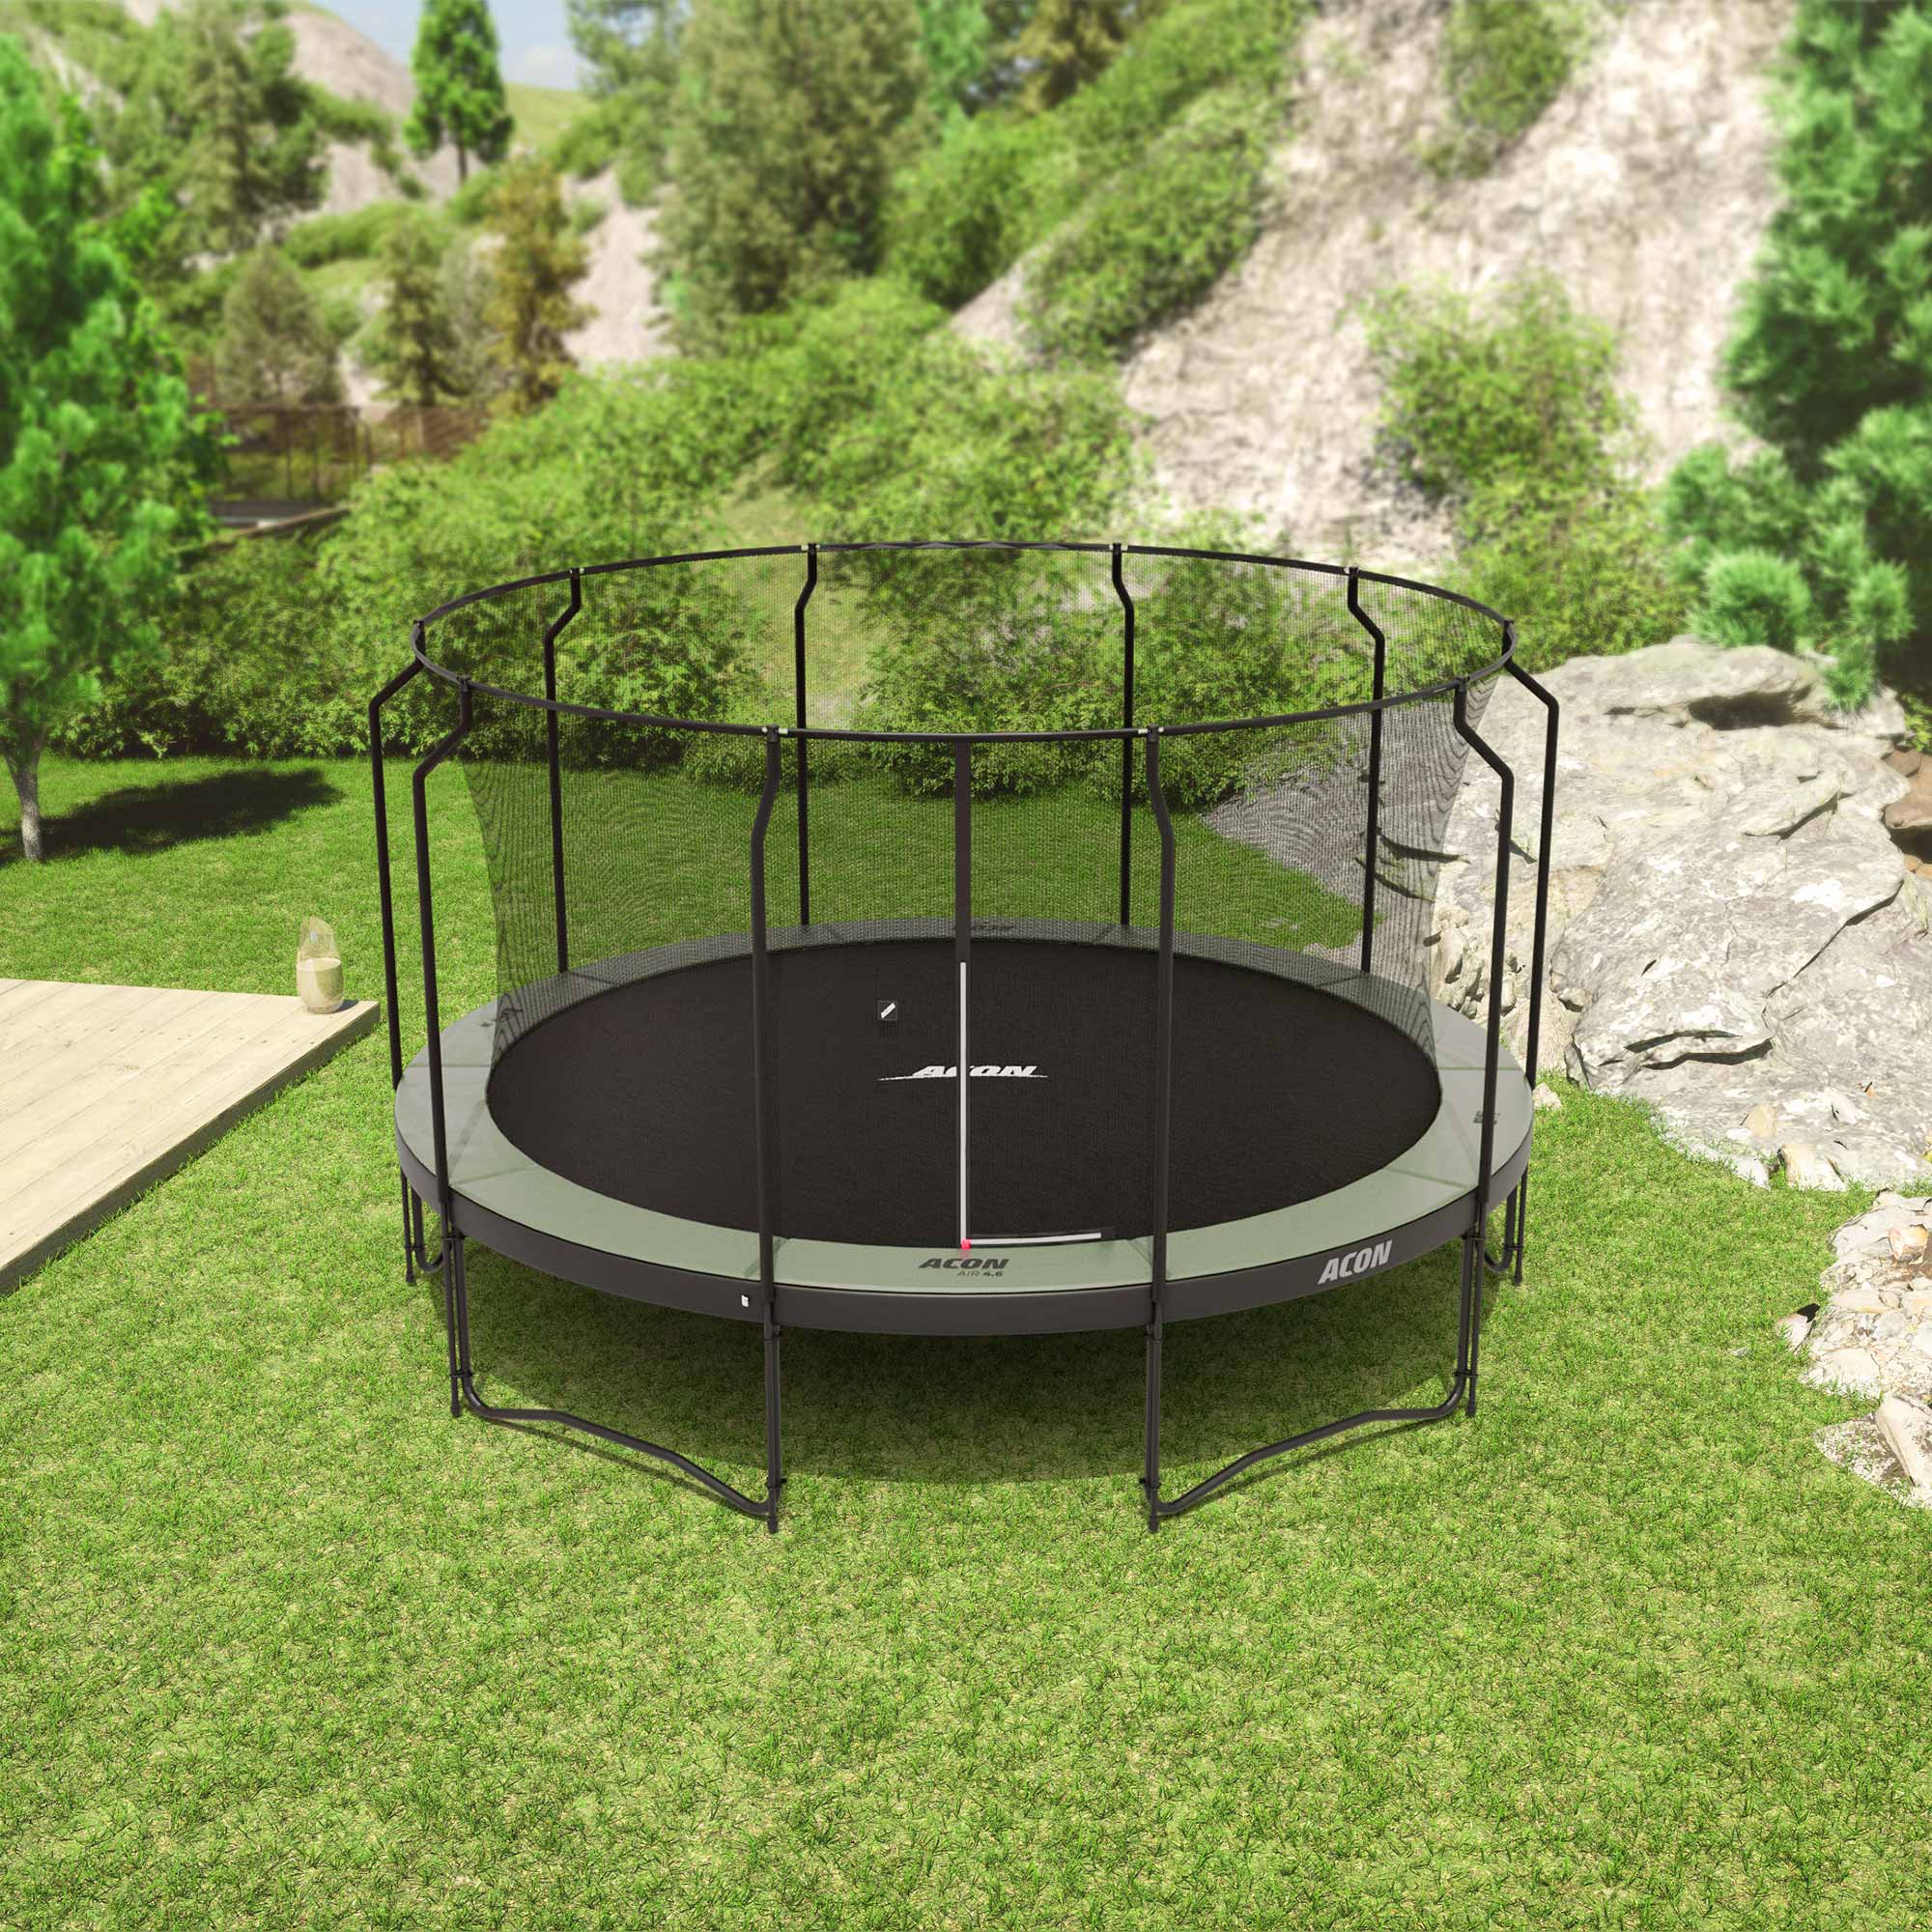 ACON 4,6m Trampoline Package with Enclosure | Buy now! –